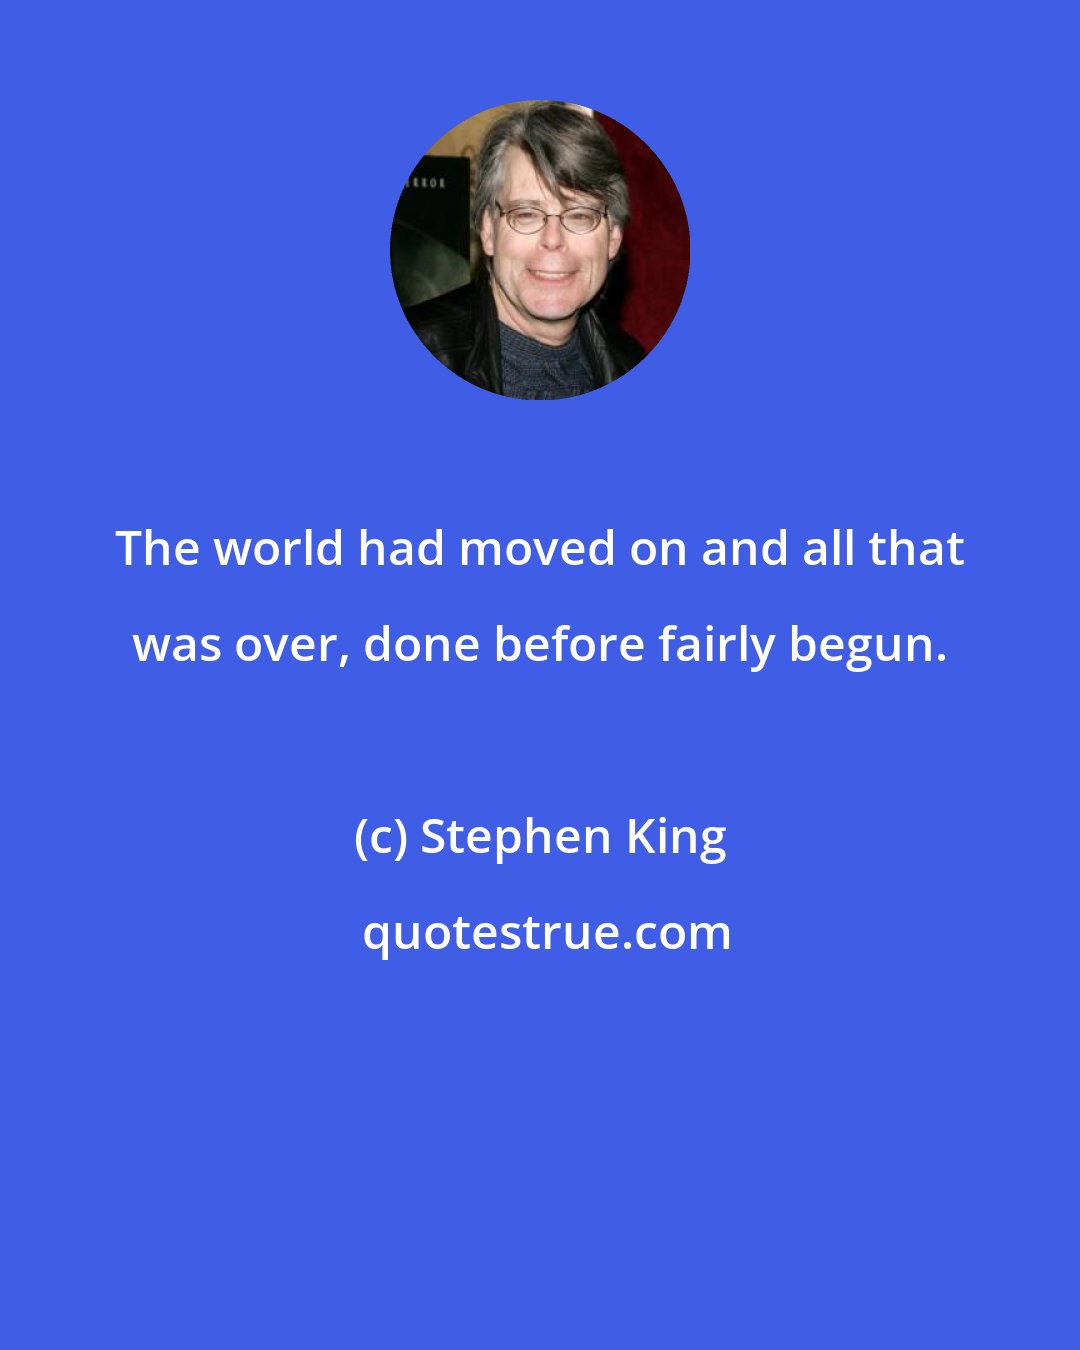 Stephen King: The world had moved on and all that was over, done before fairly begun.